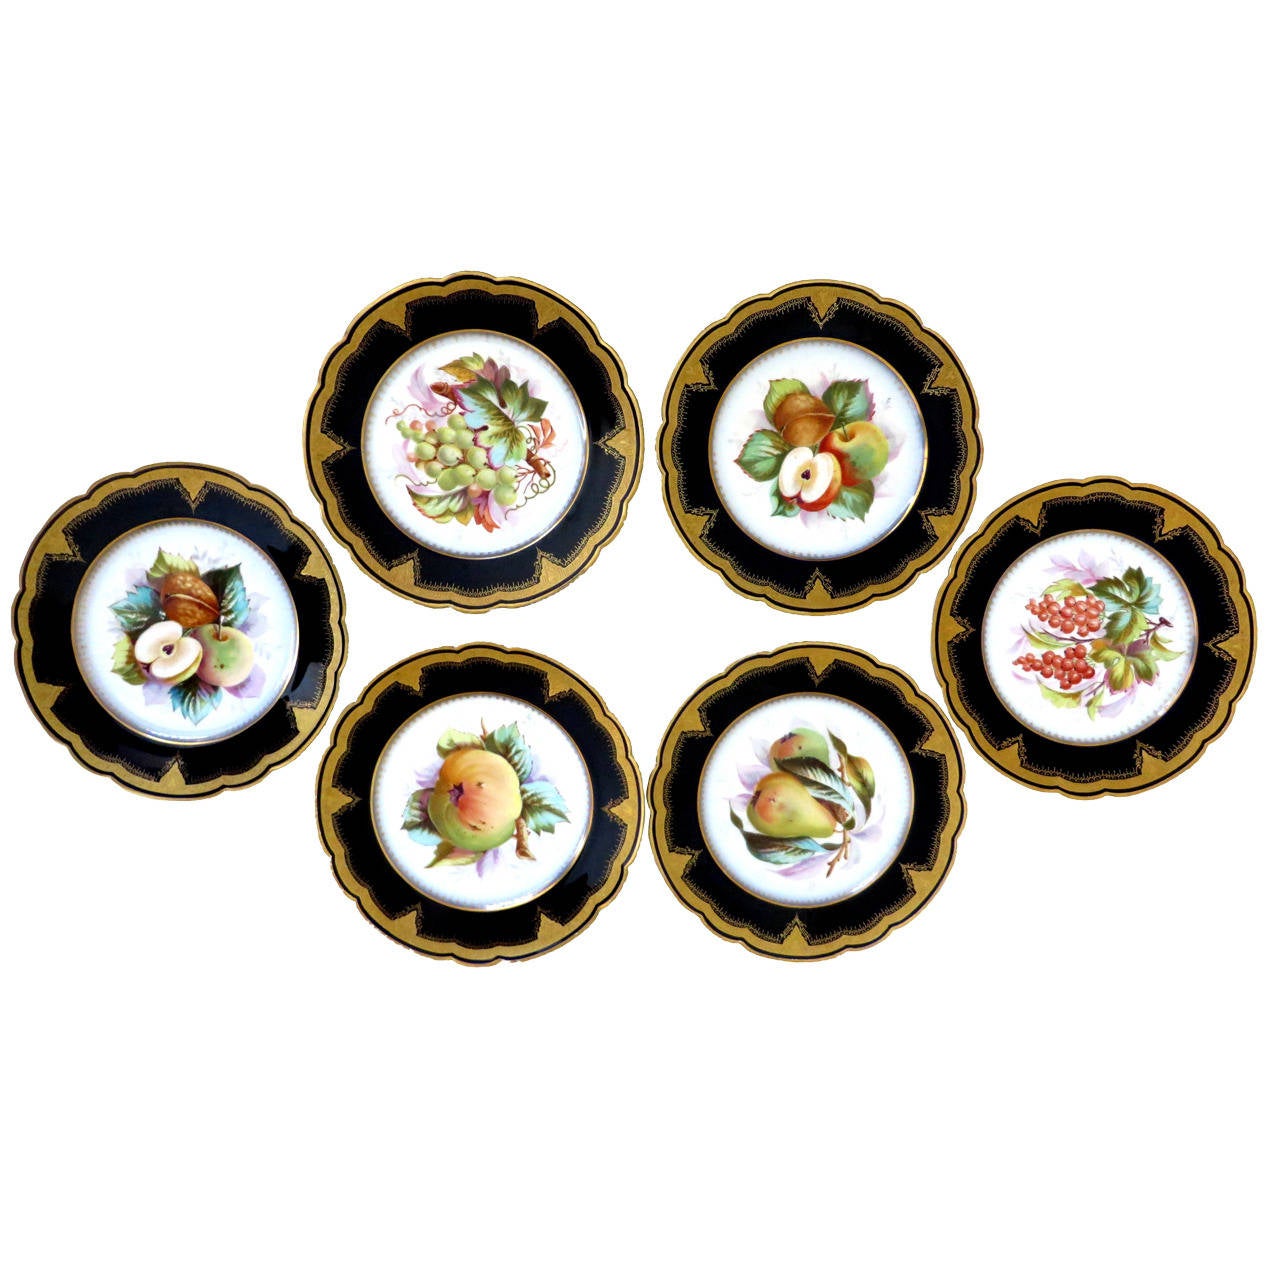 19th Century Hand-Painted Veritas Vinicit Plates For Sale at 1stdibs